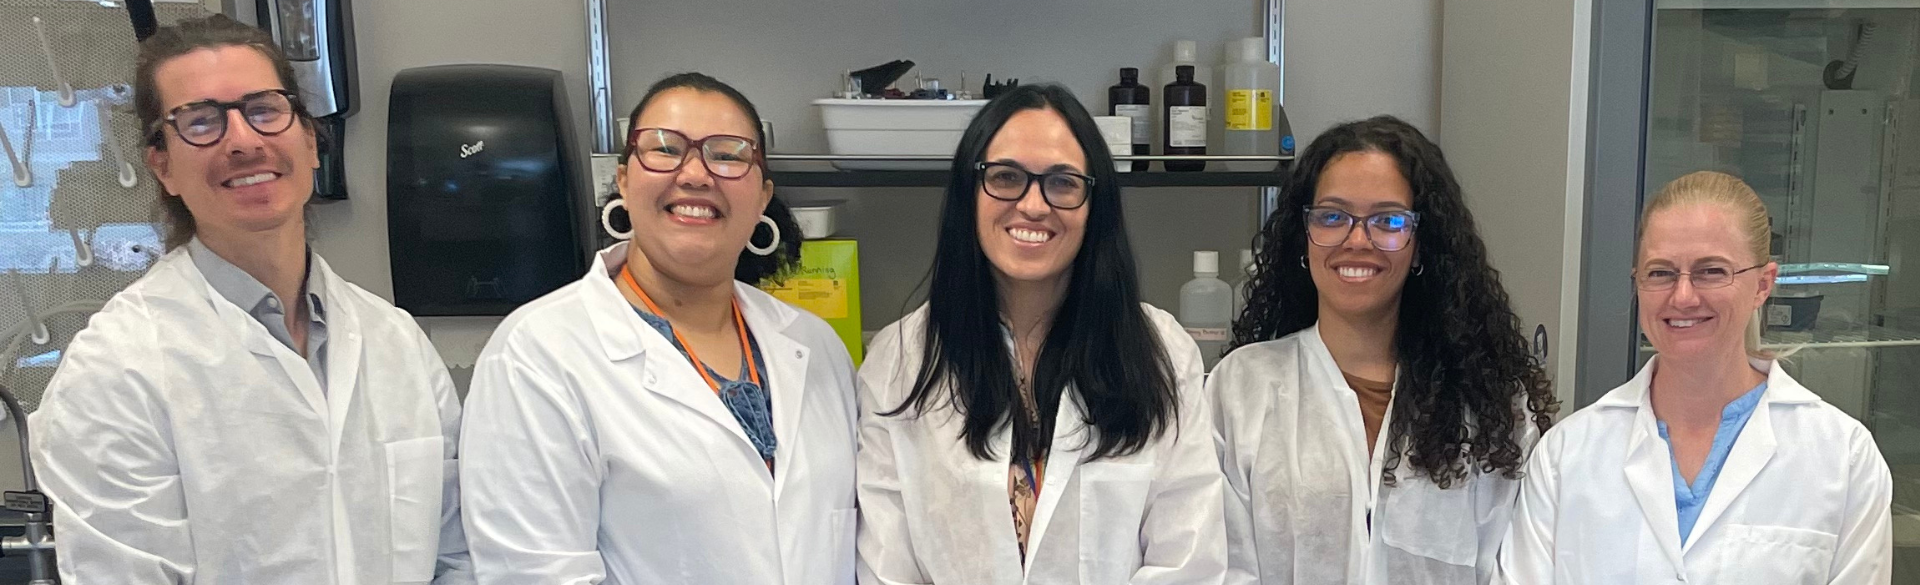 Maria Amaya, MD, PhD, pictured center, smiles alongside fellow researchers in her lab, the Amaya Lab.